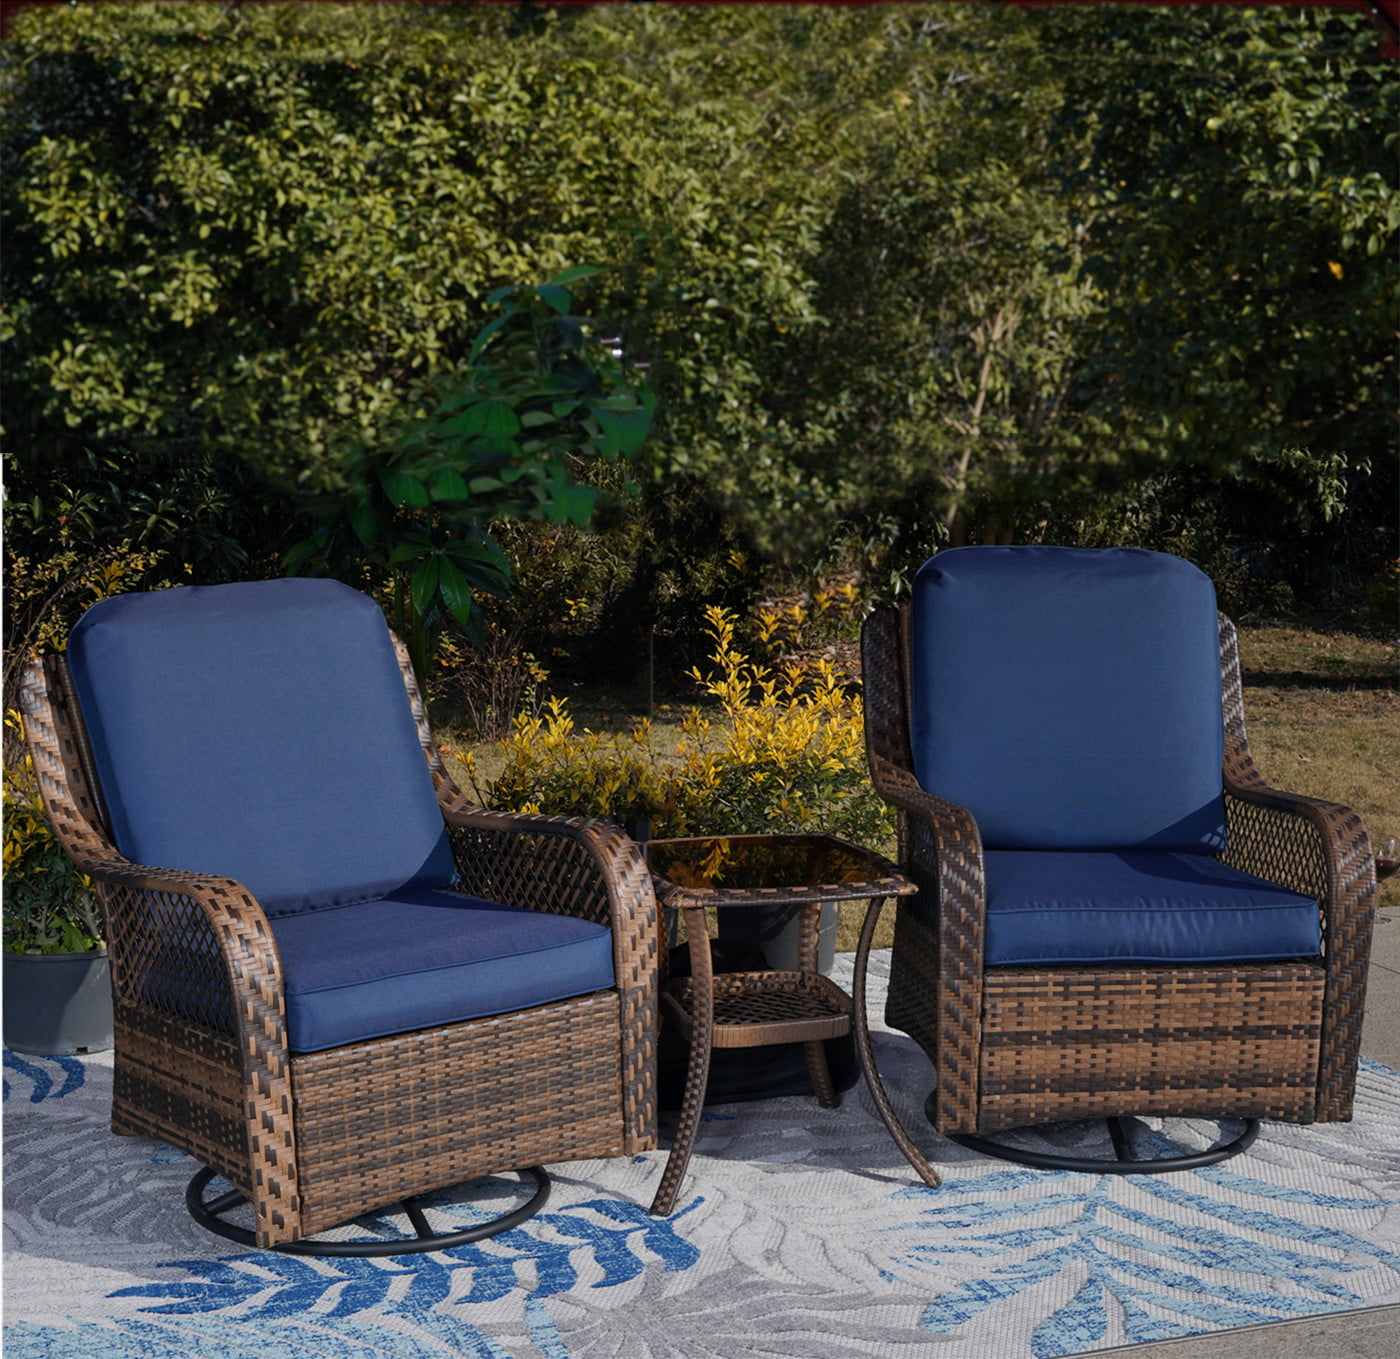 Outdoor Wicker Furniture Rattan Chair Details about    20 Pcs Patio Wicker Furniture Clips 